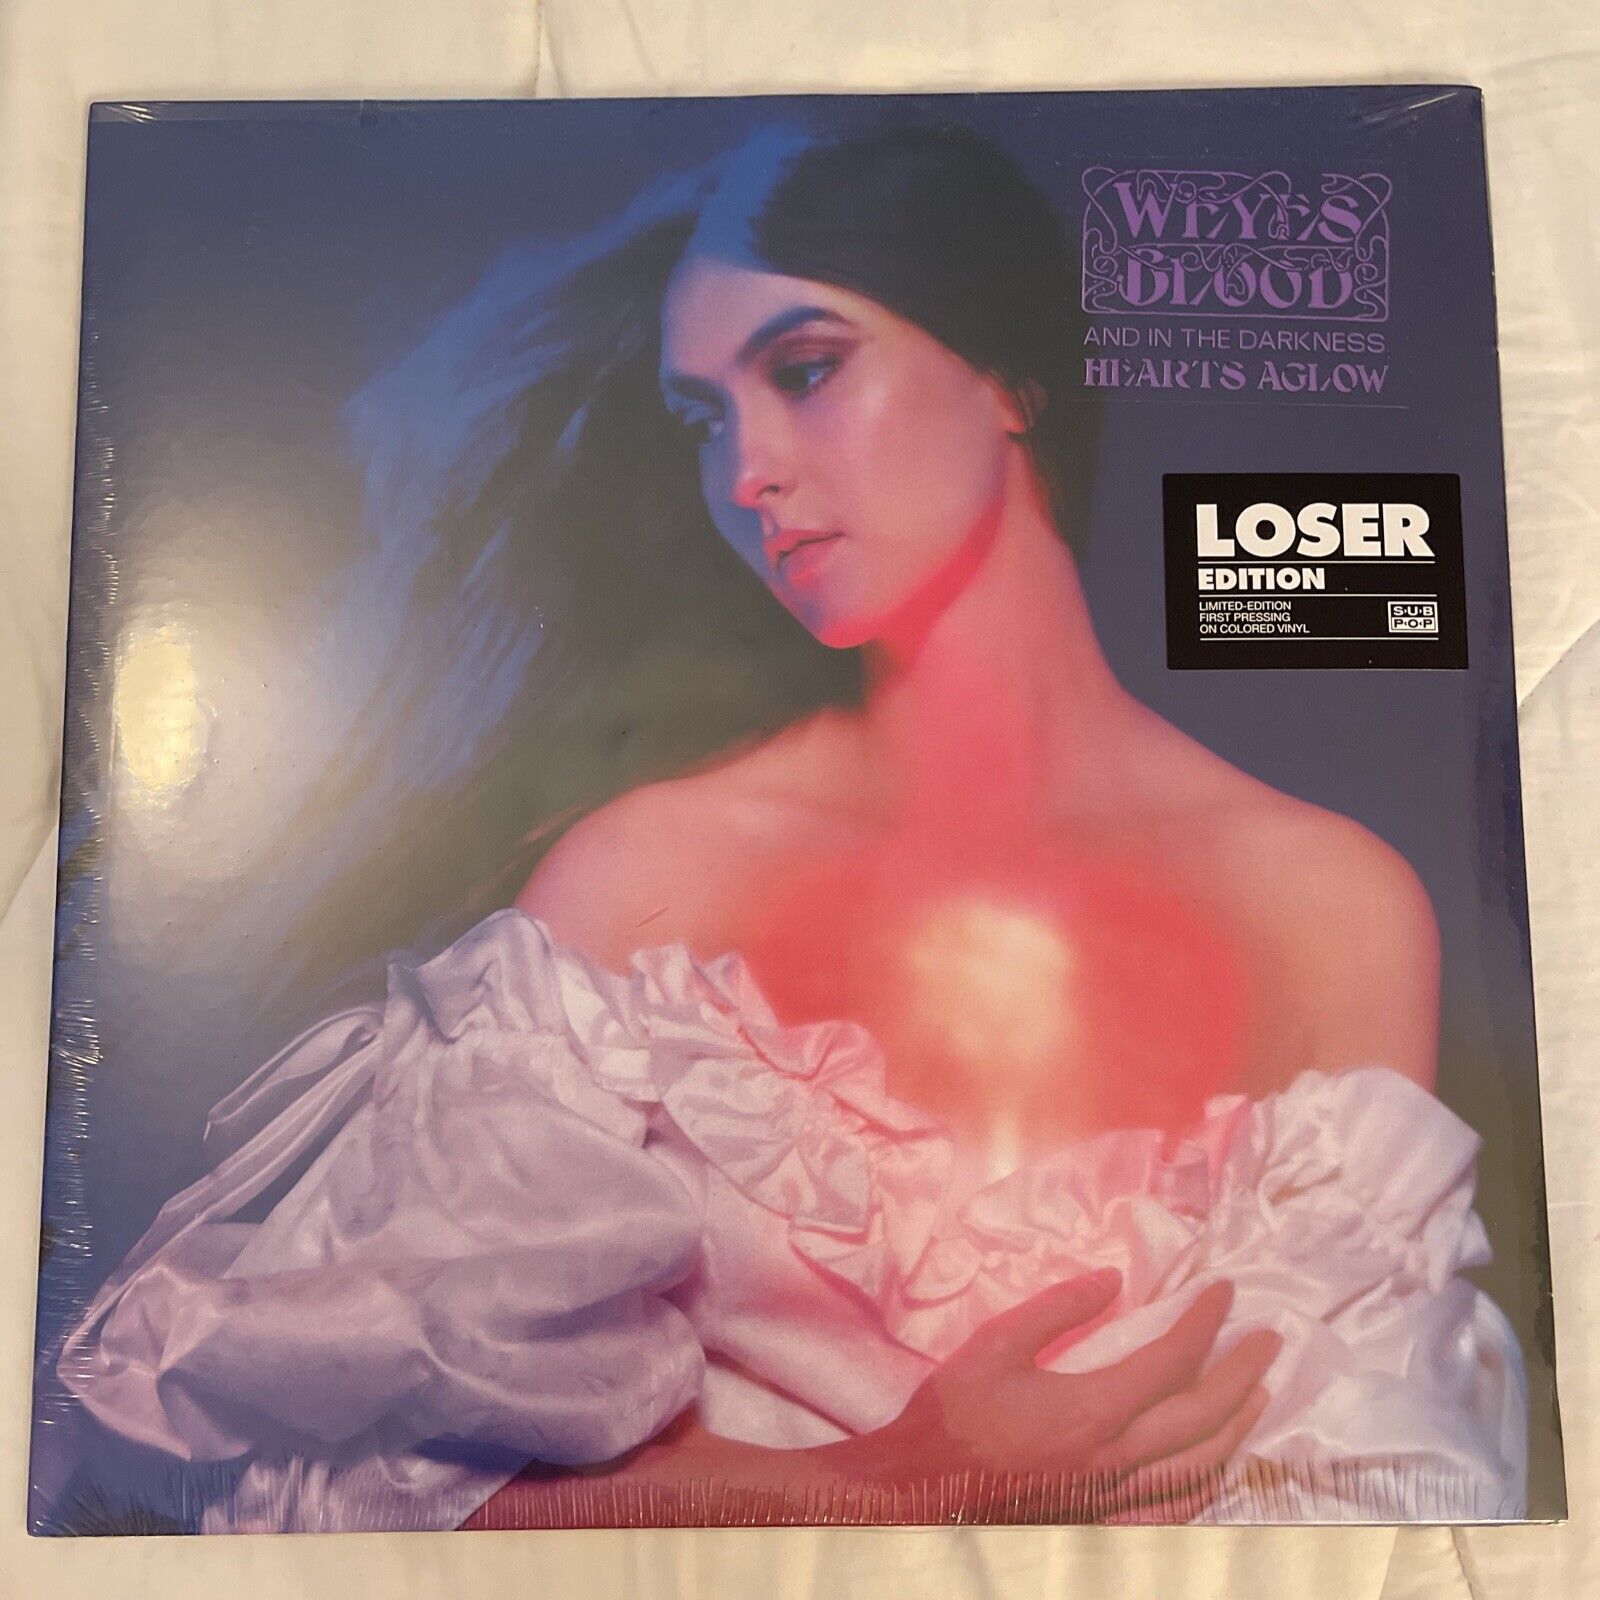 WEYES BLOOD AND IN THE DARKNESS, HEARTS AGLOW (LOSER EDITION PURPLE VINYL) Recor